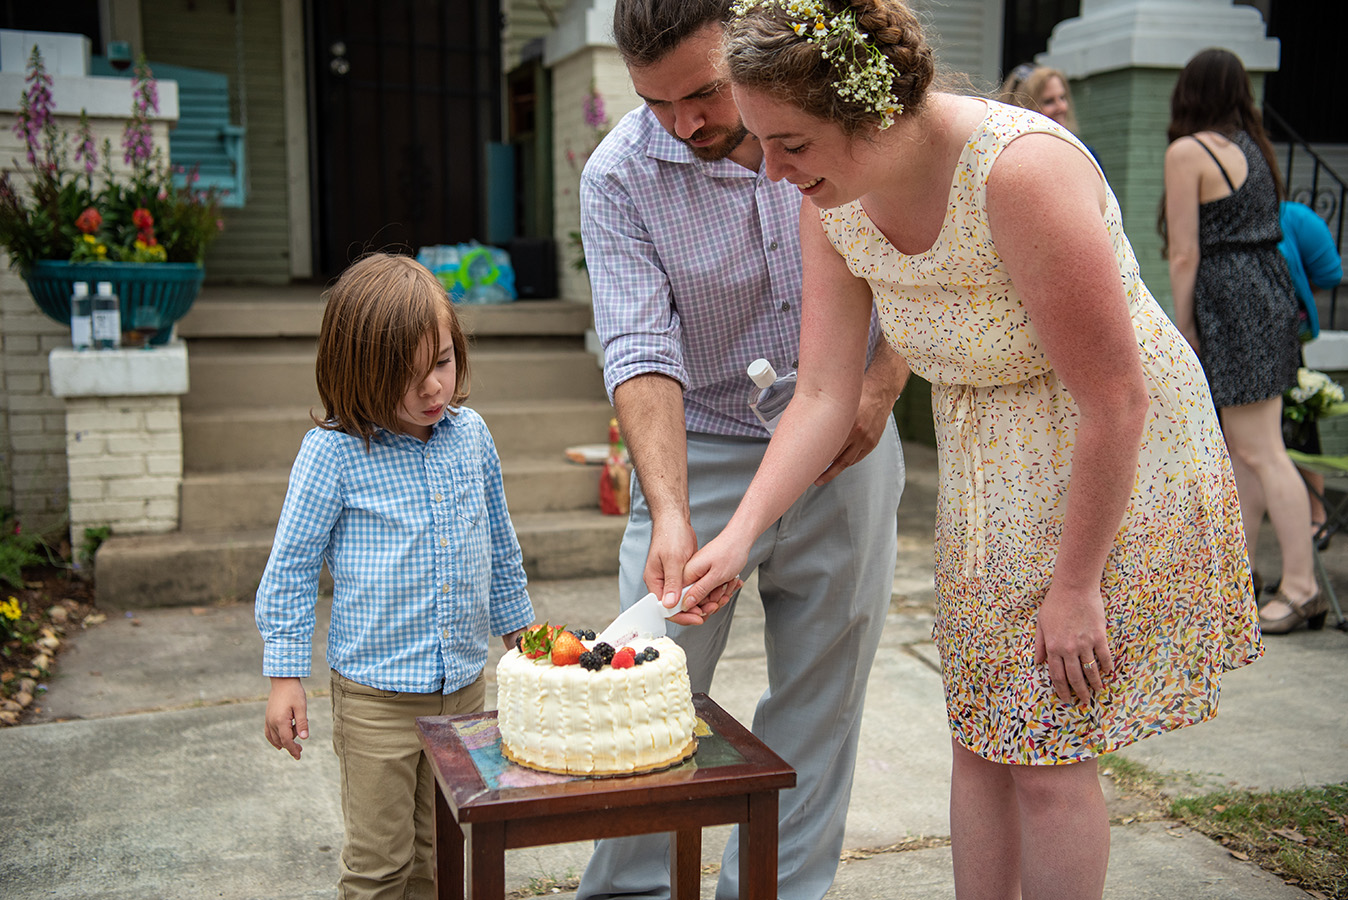 Elizabeth and Greg cut their Berry Chantilly wedding cake from Bywater Bakery with their son Frank watching.